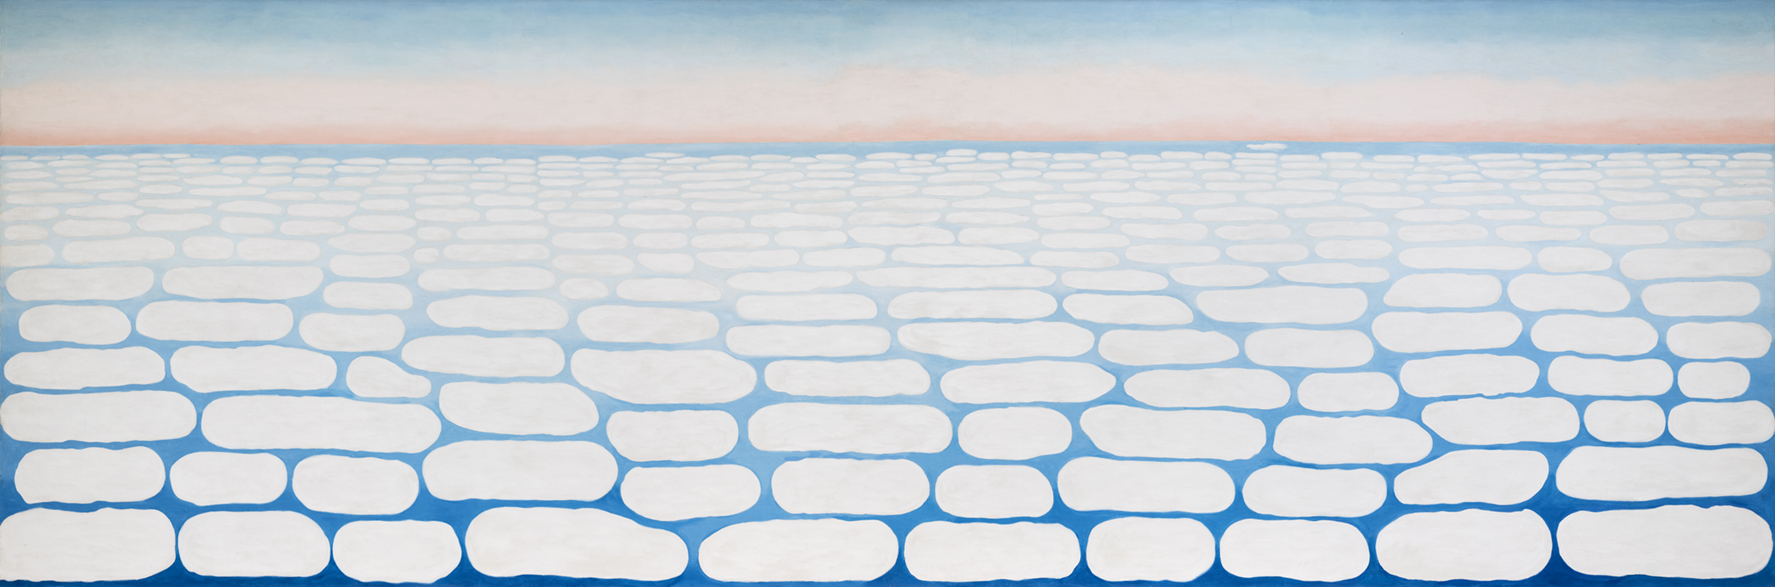 Georgia O'Keeffe. Sky above Clouds IV. 1965. Source: Art Institute of Chicago